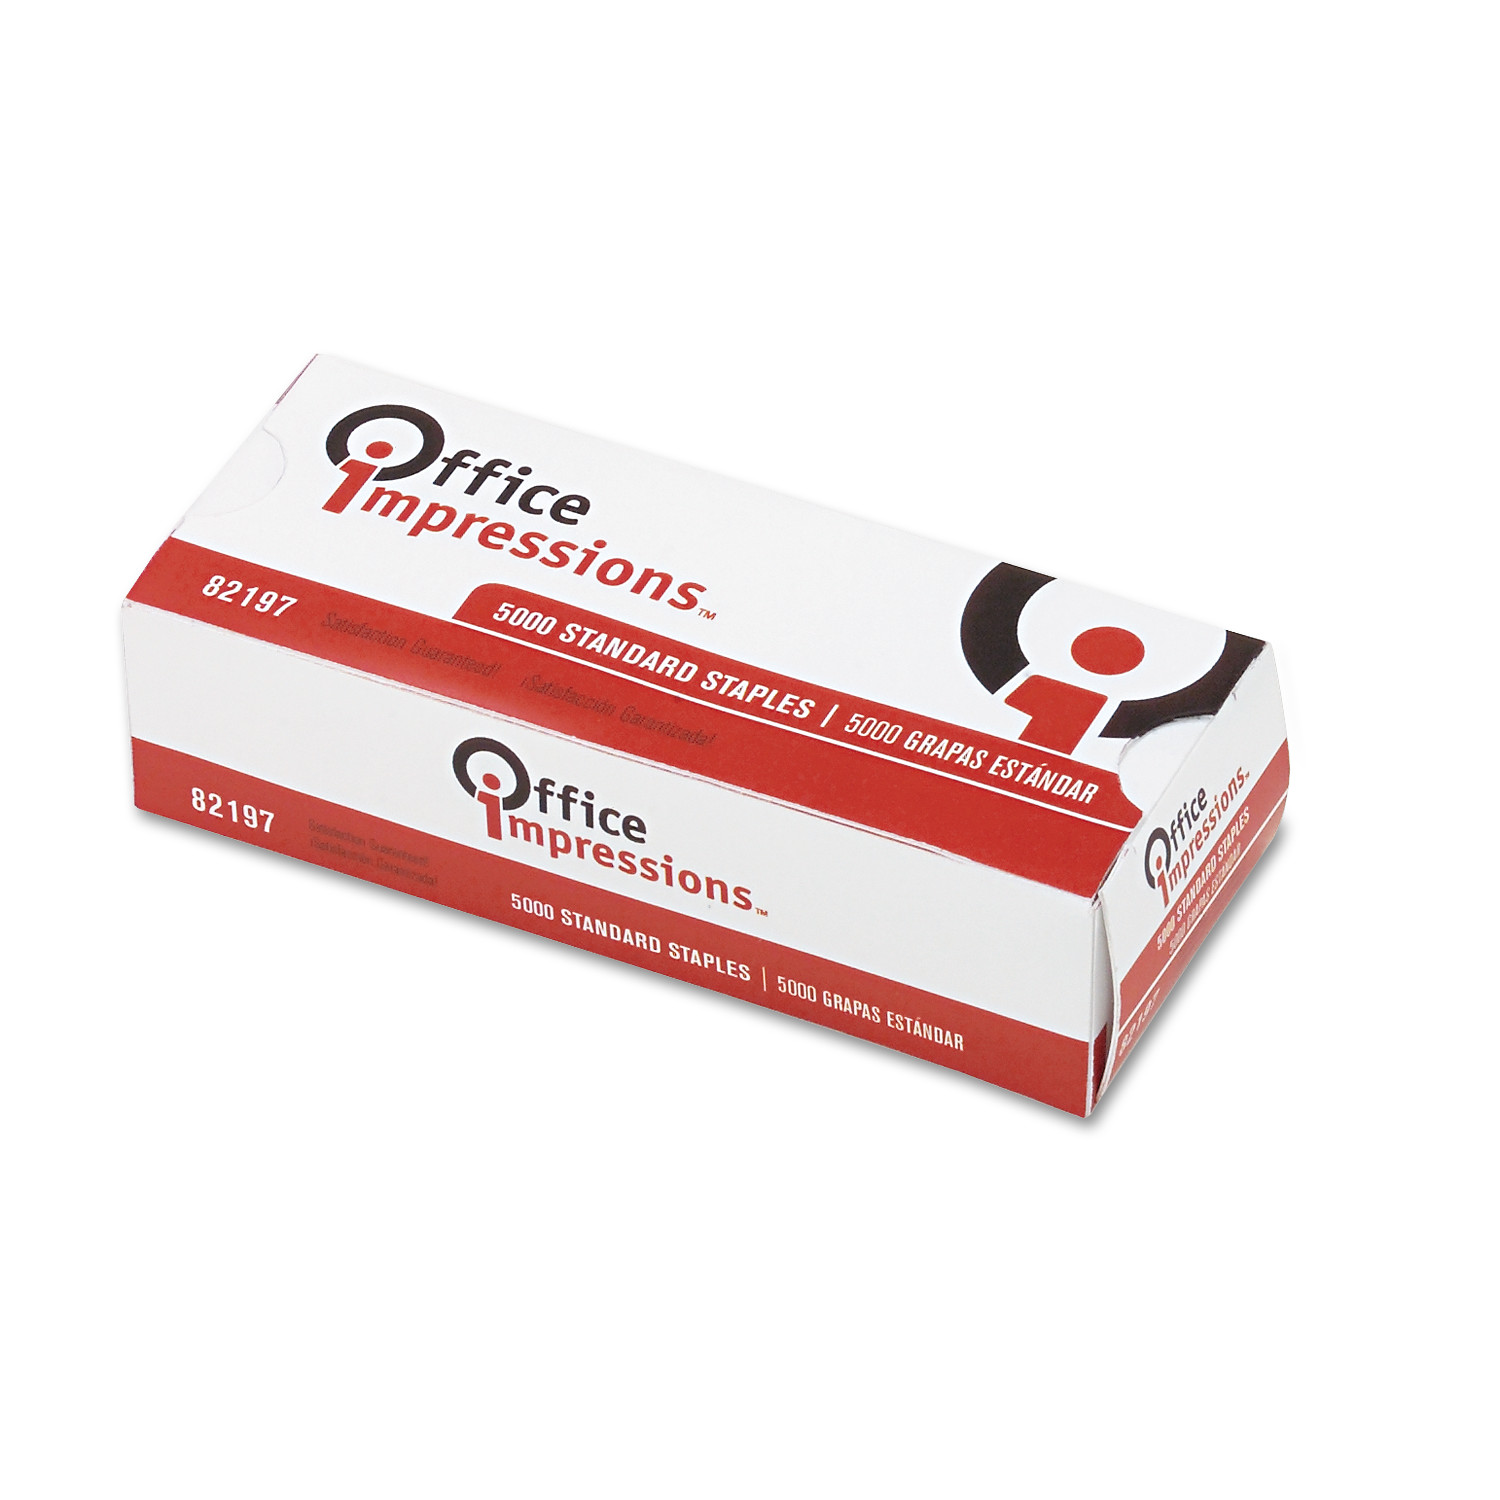 Office Impressions Standard Staples, 5,000/Box, 5 Boxes/Pack -OFF82197PK - image 2 of 3